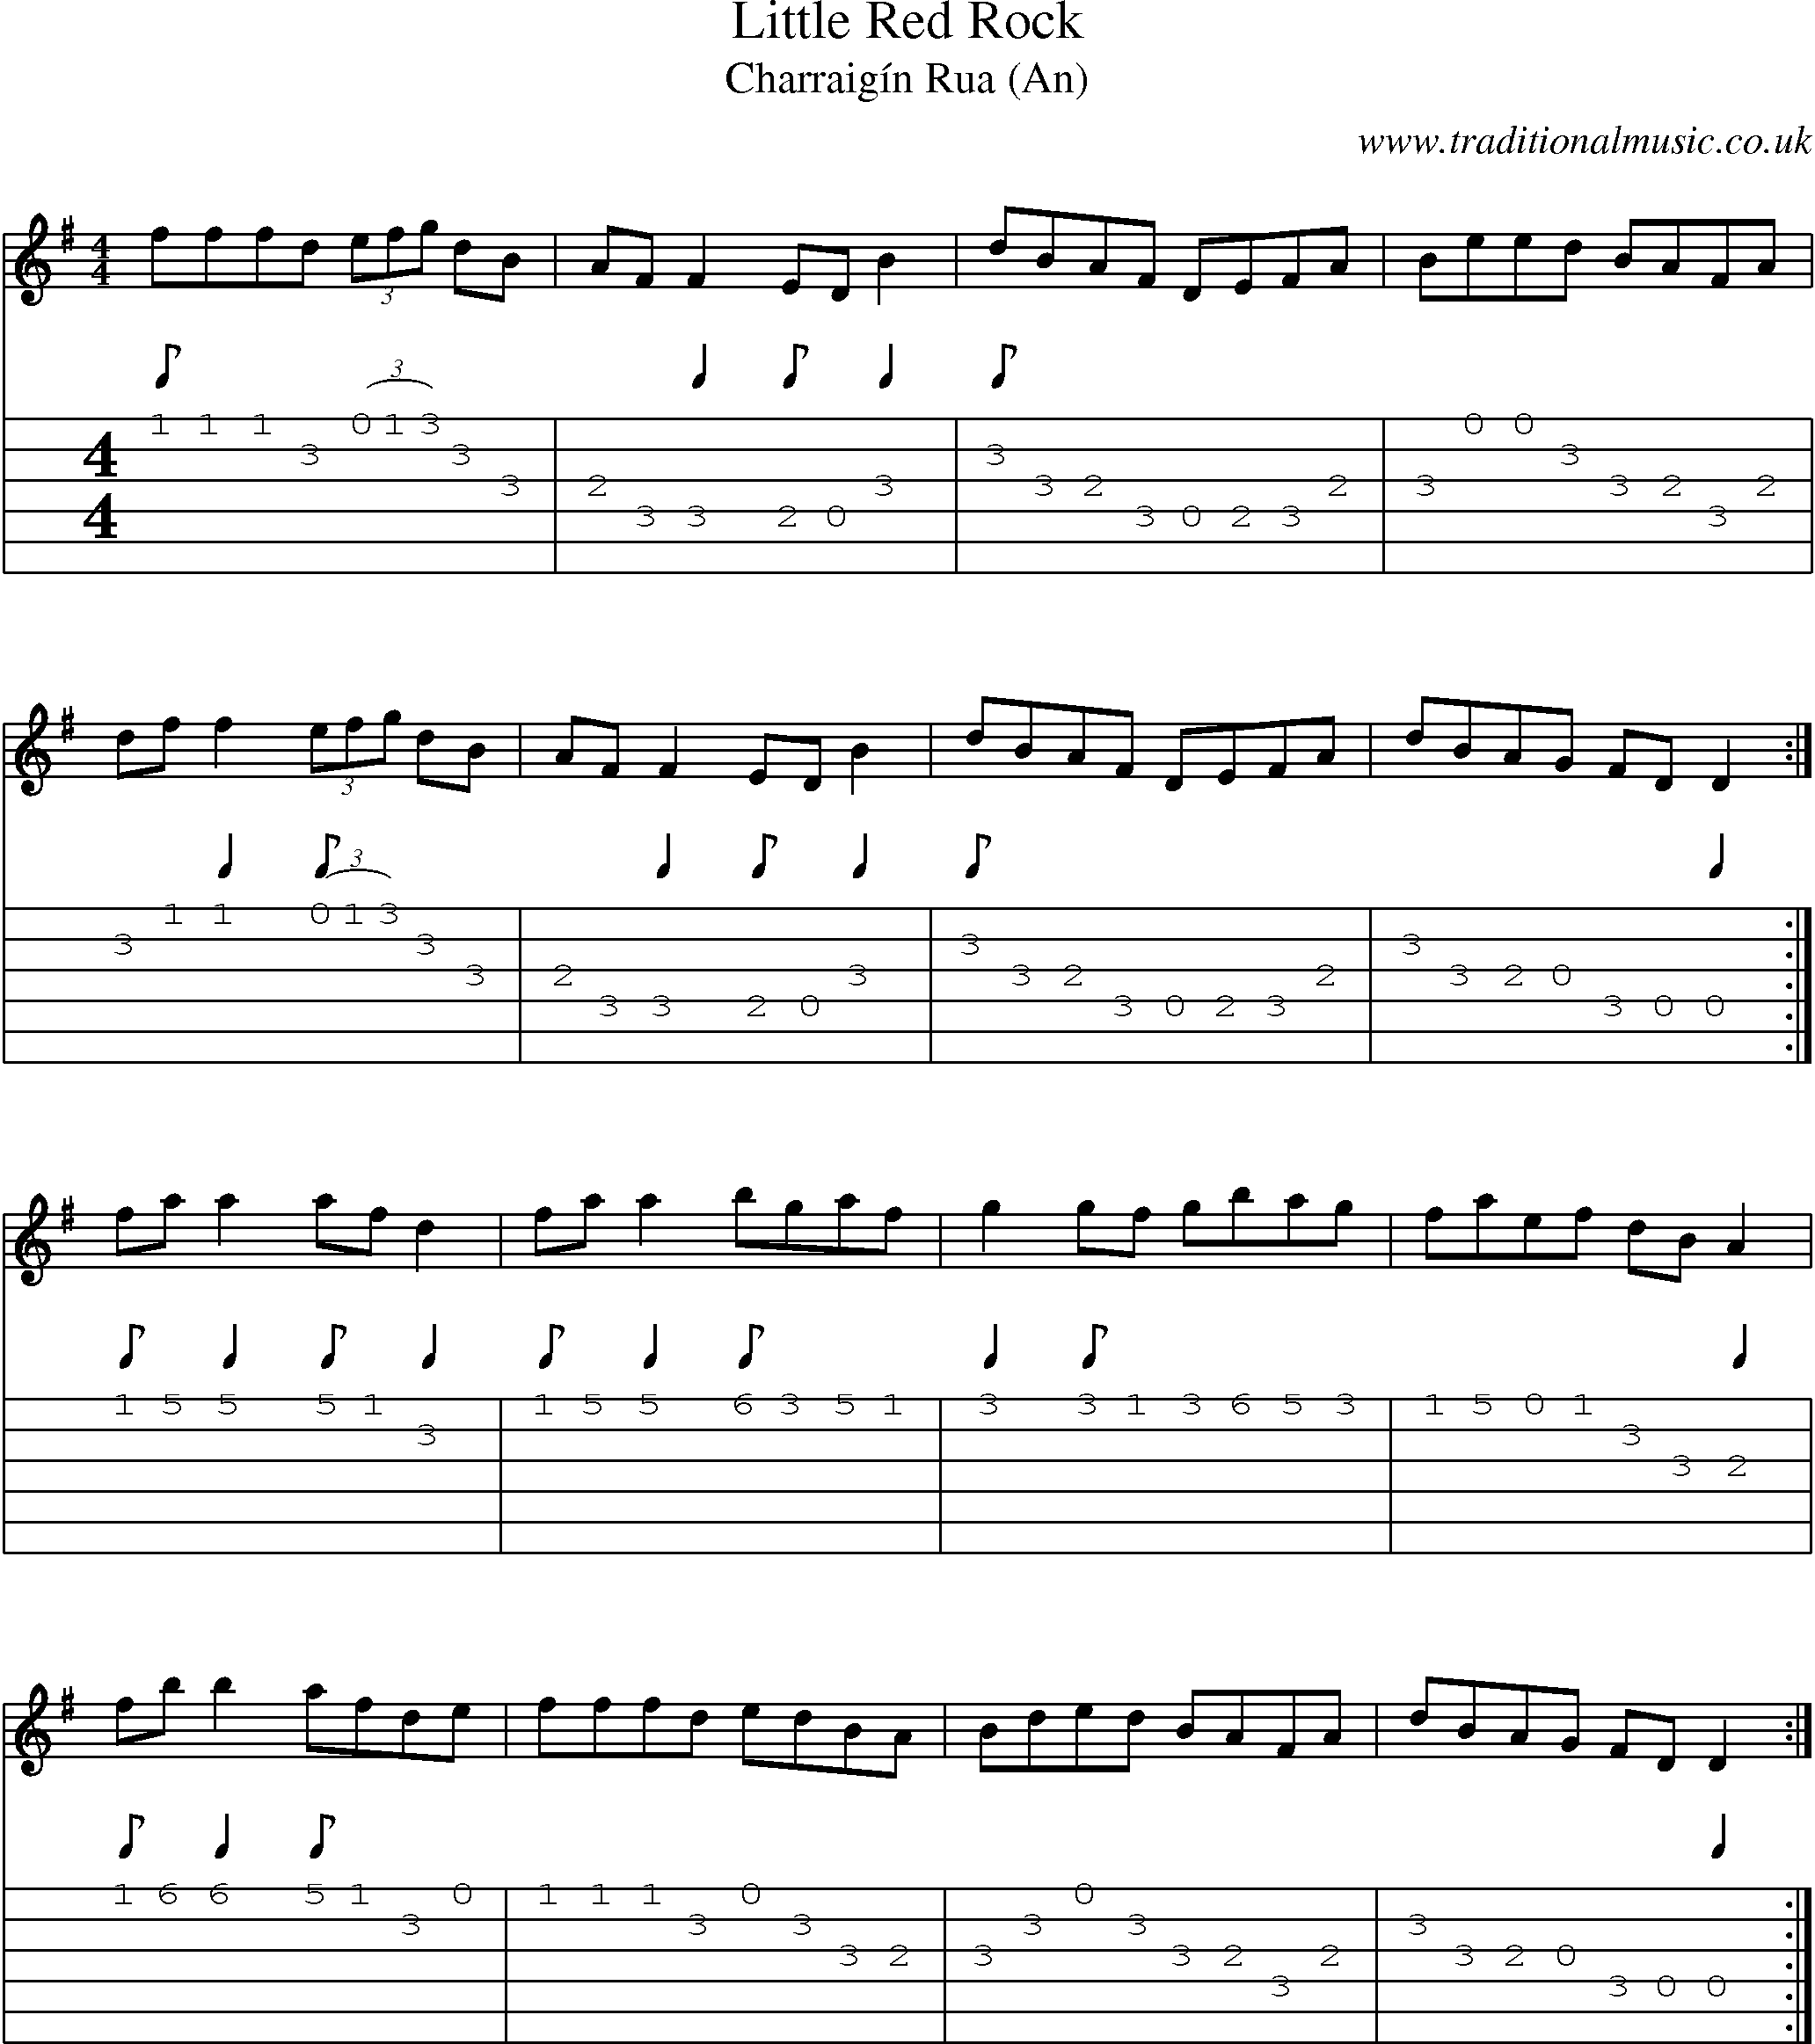 Music Score and Guitar Tabs for Little Red Rock